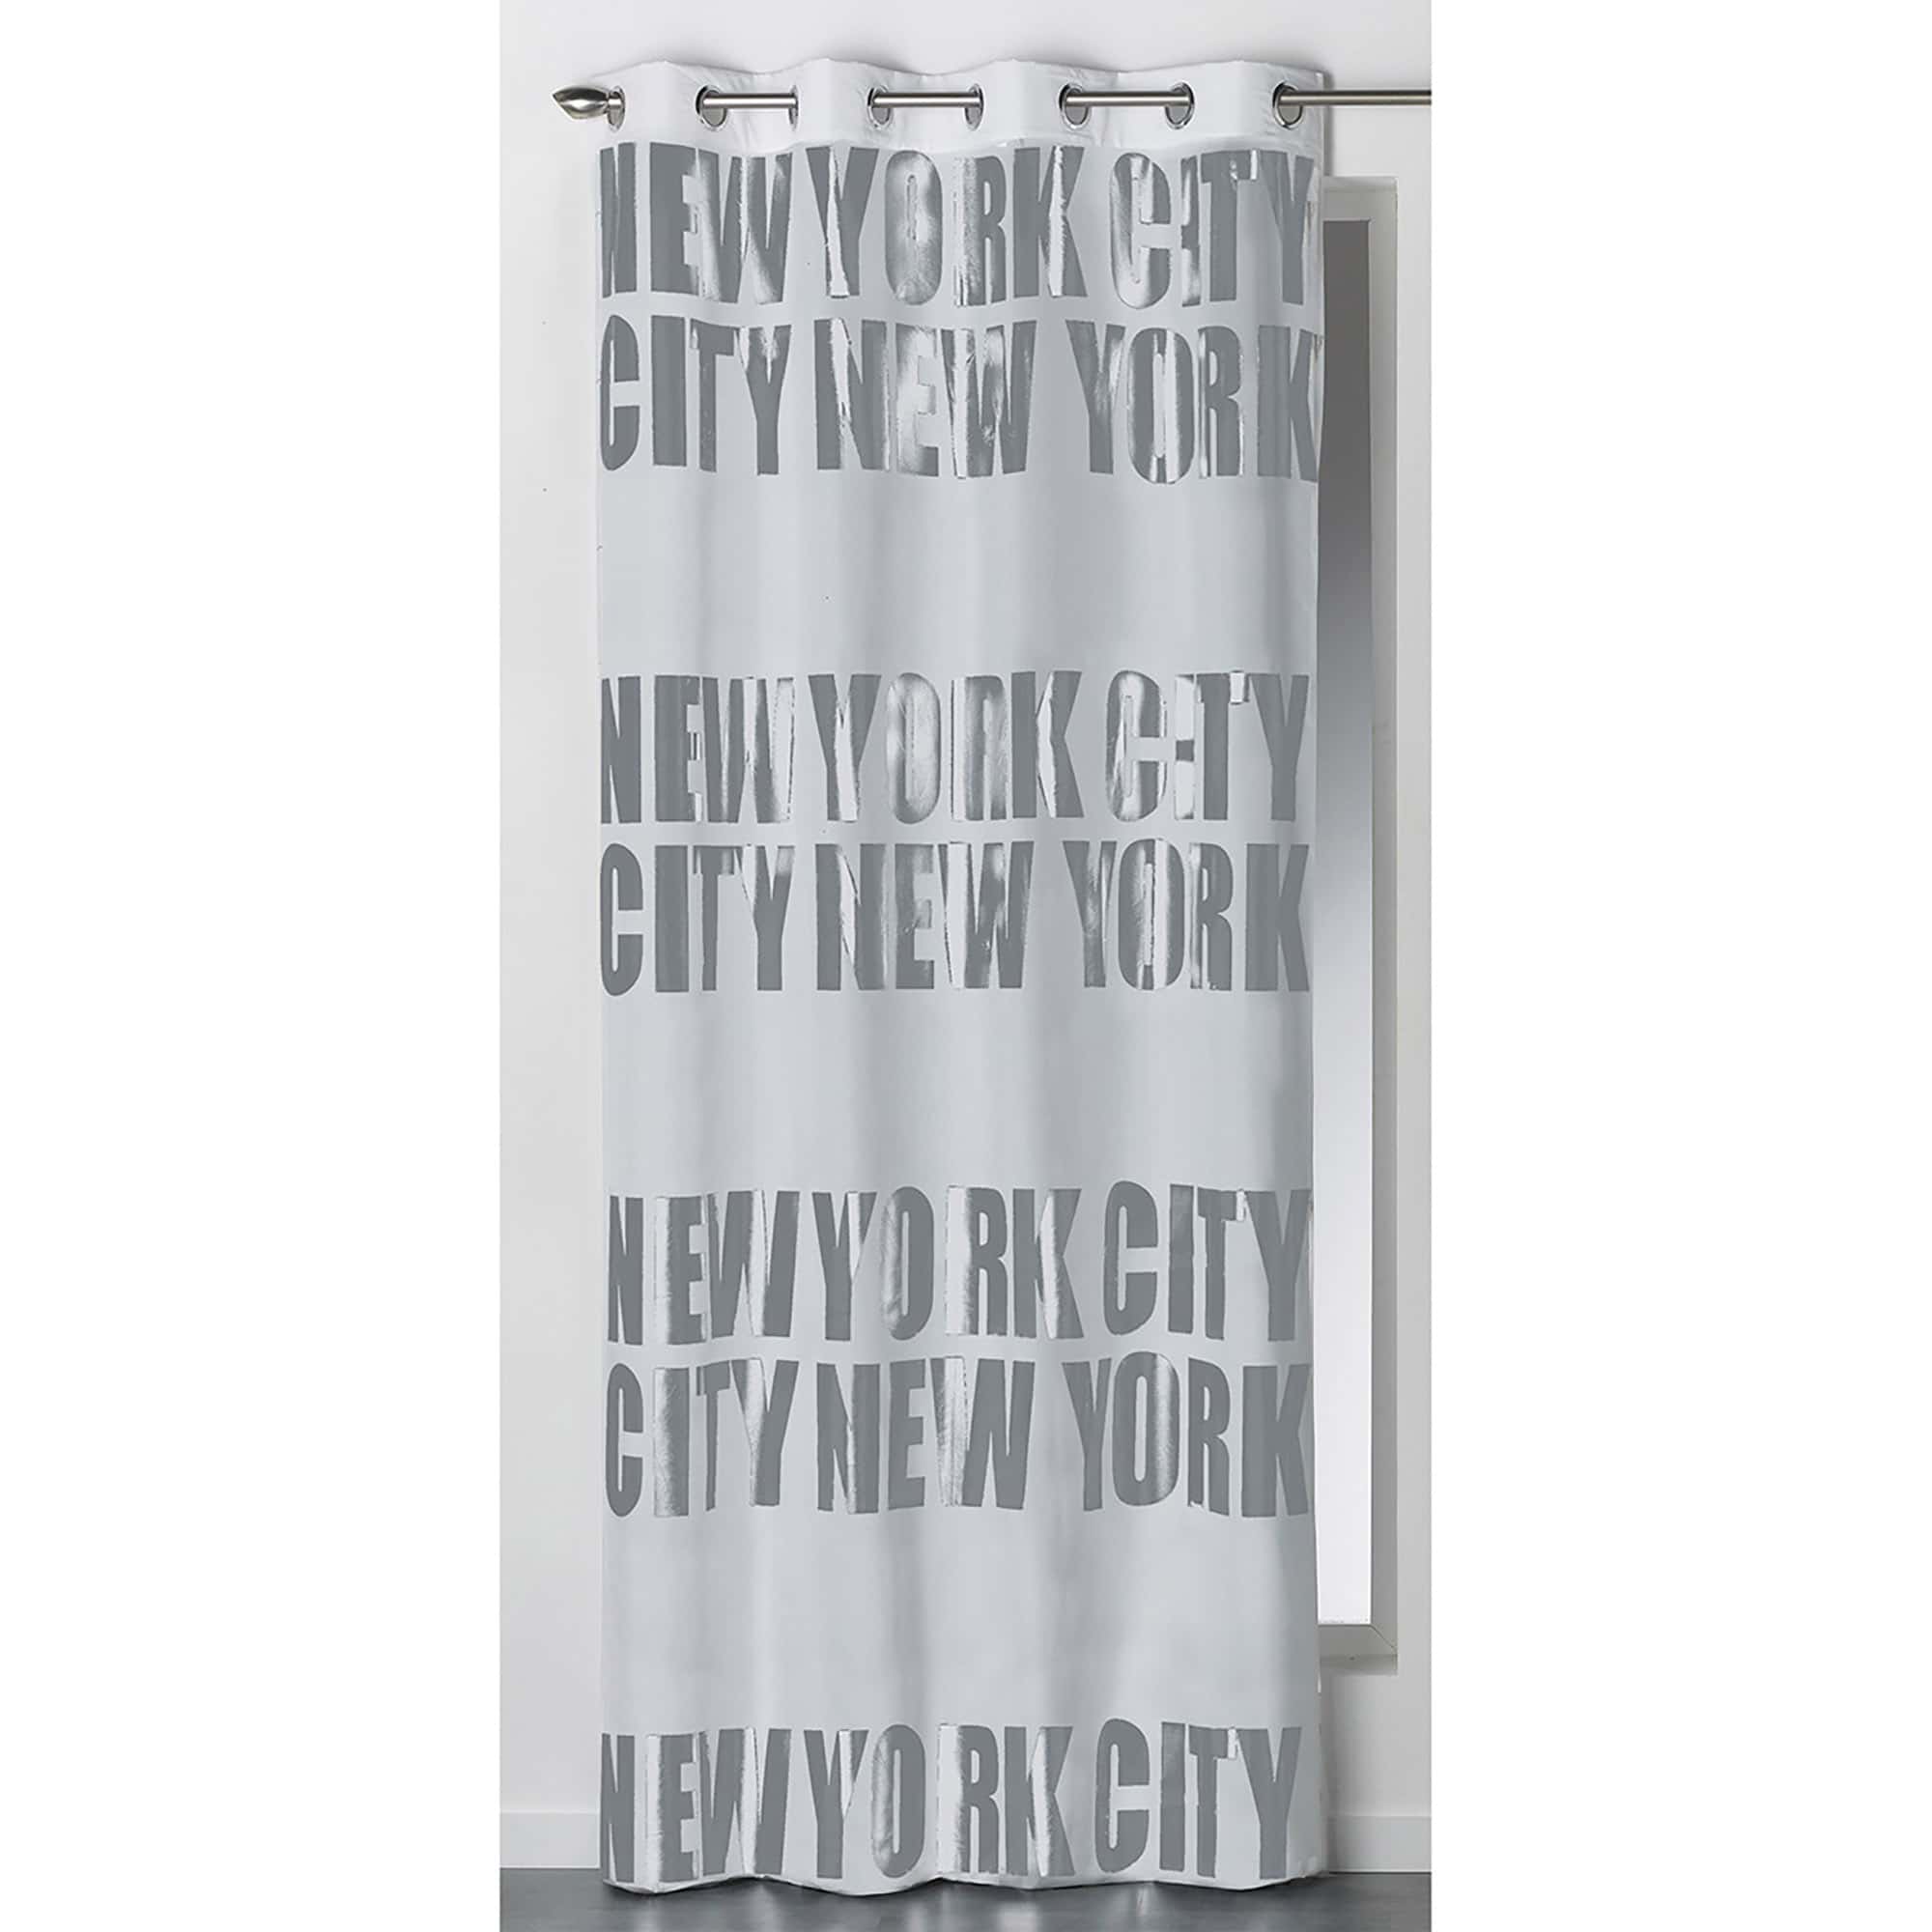 solid light gray black out curtain silver NYC lettering 1 panel for large window